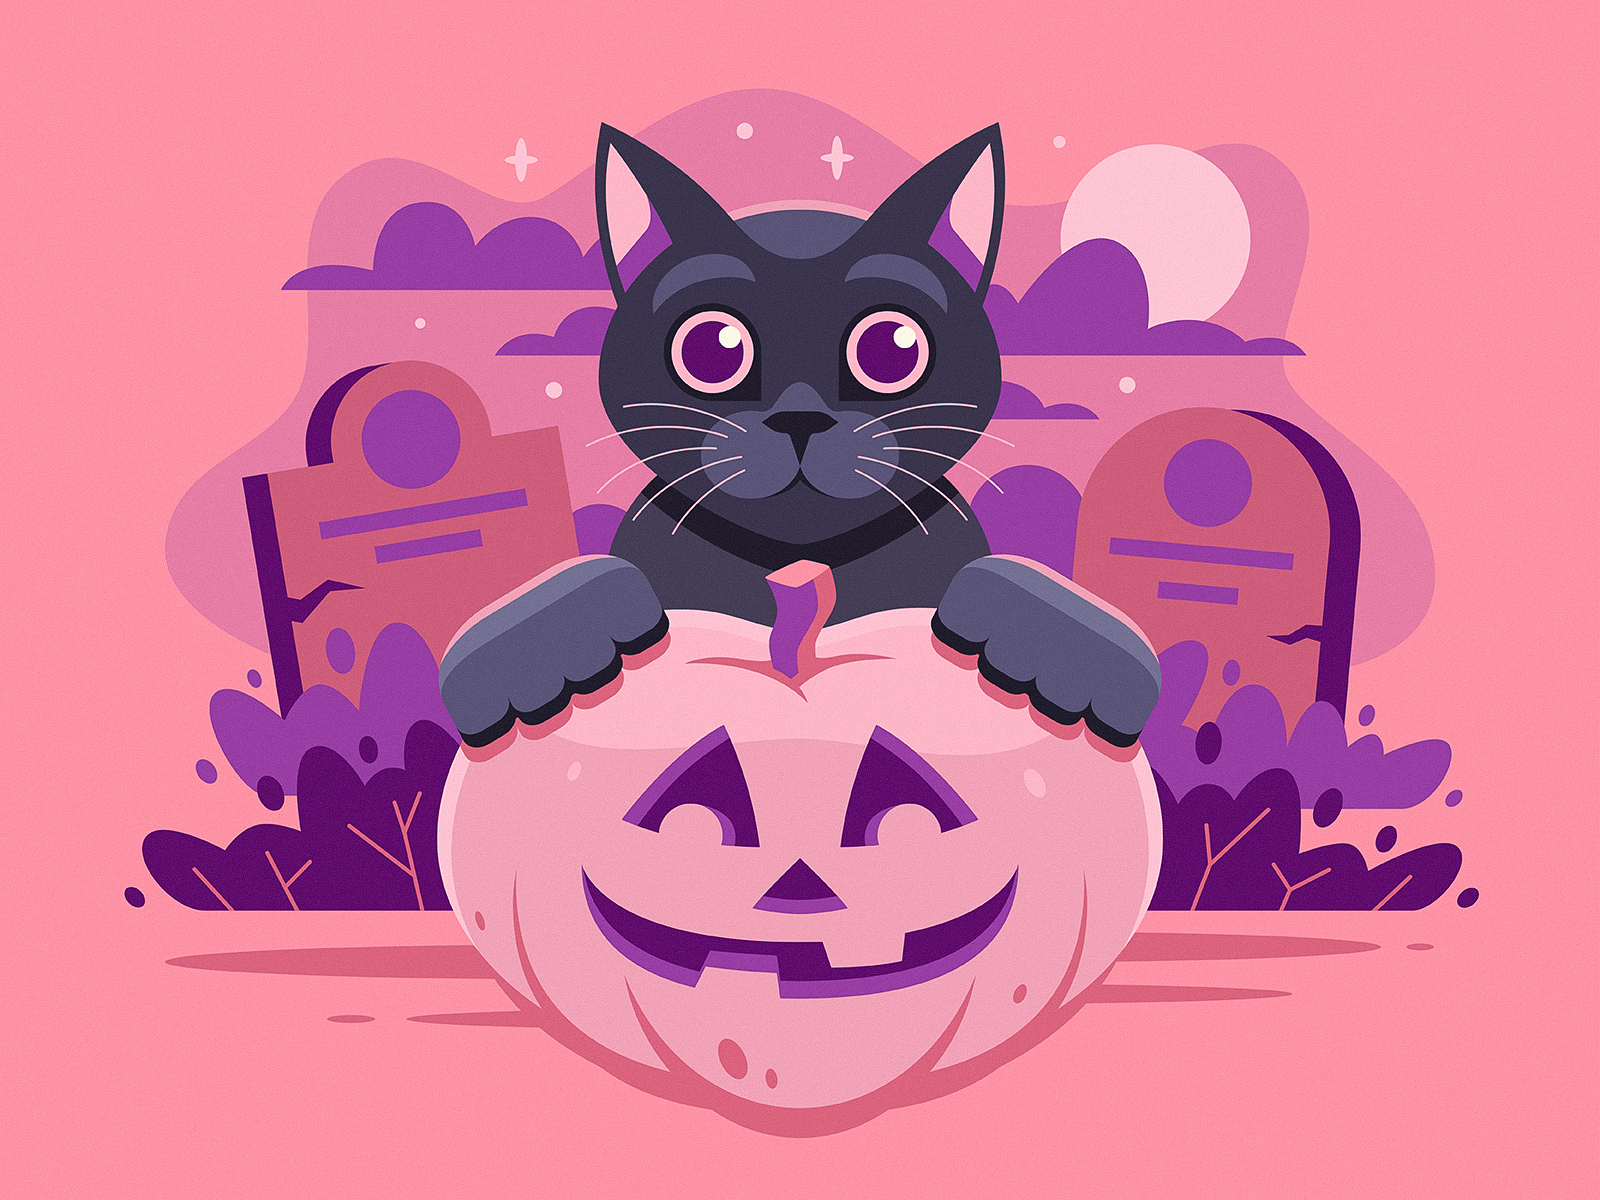 Halloween Kitty by Tanner Wayment on Dribbble